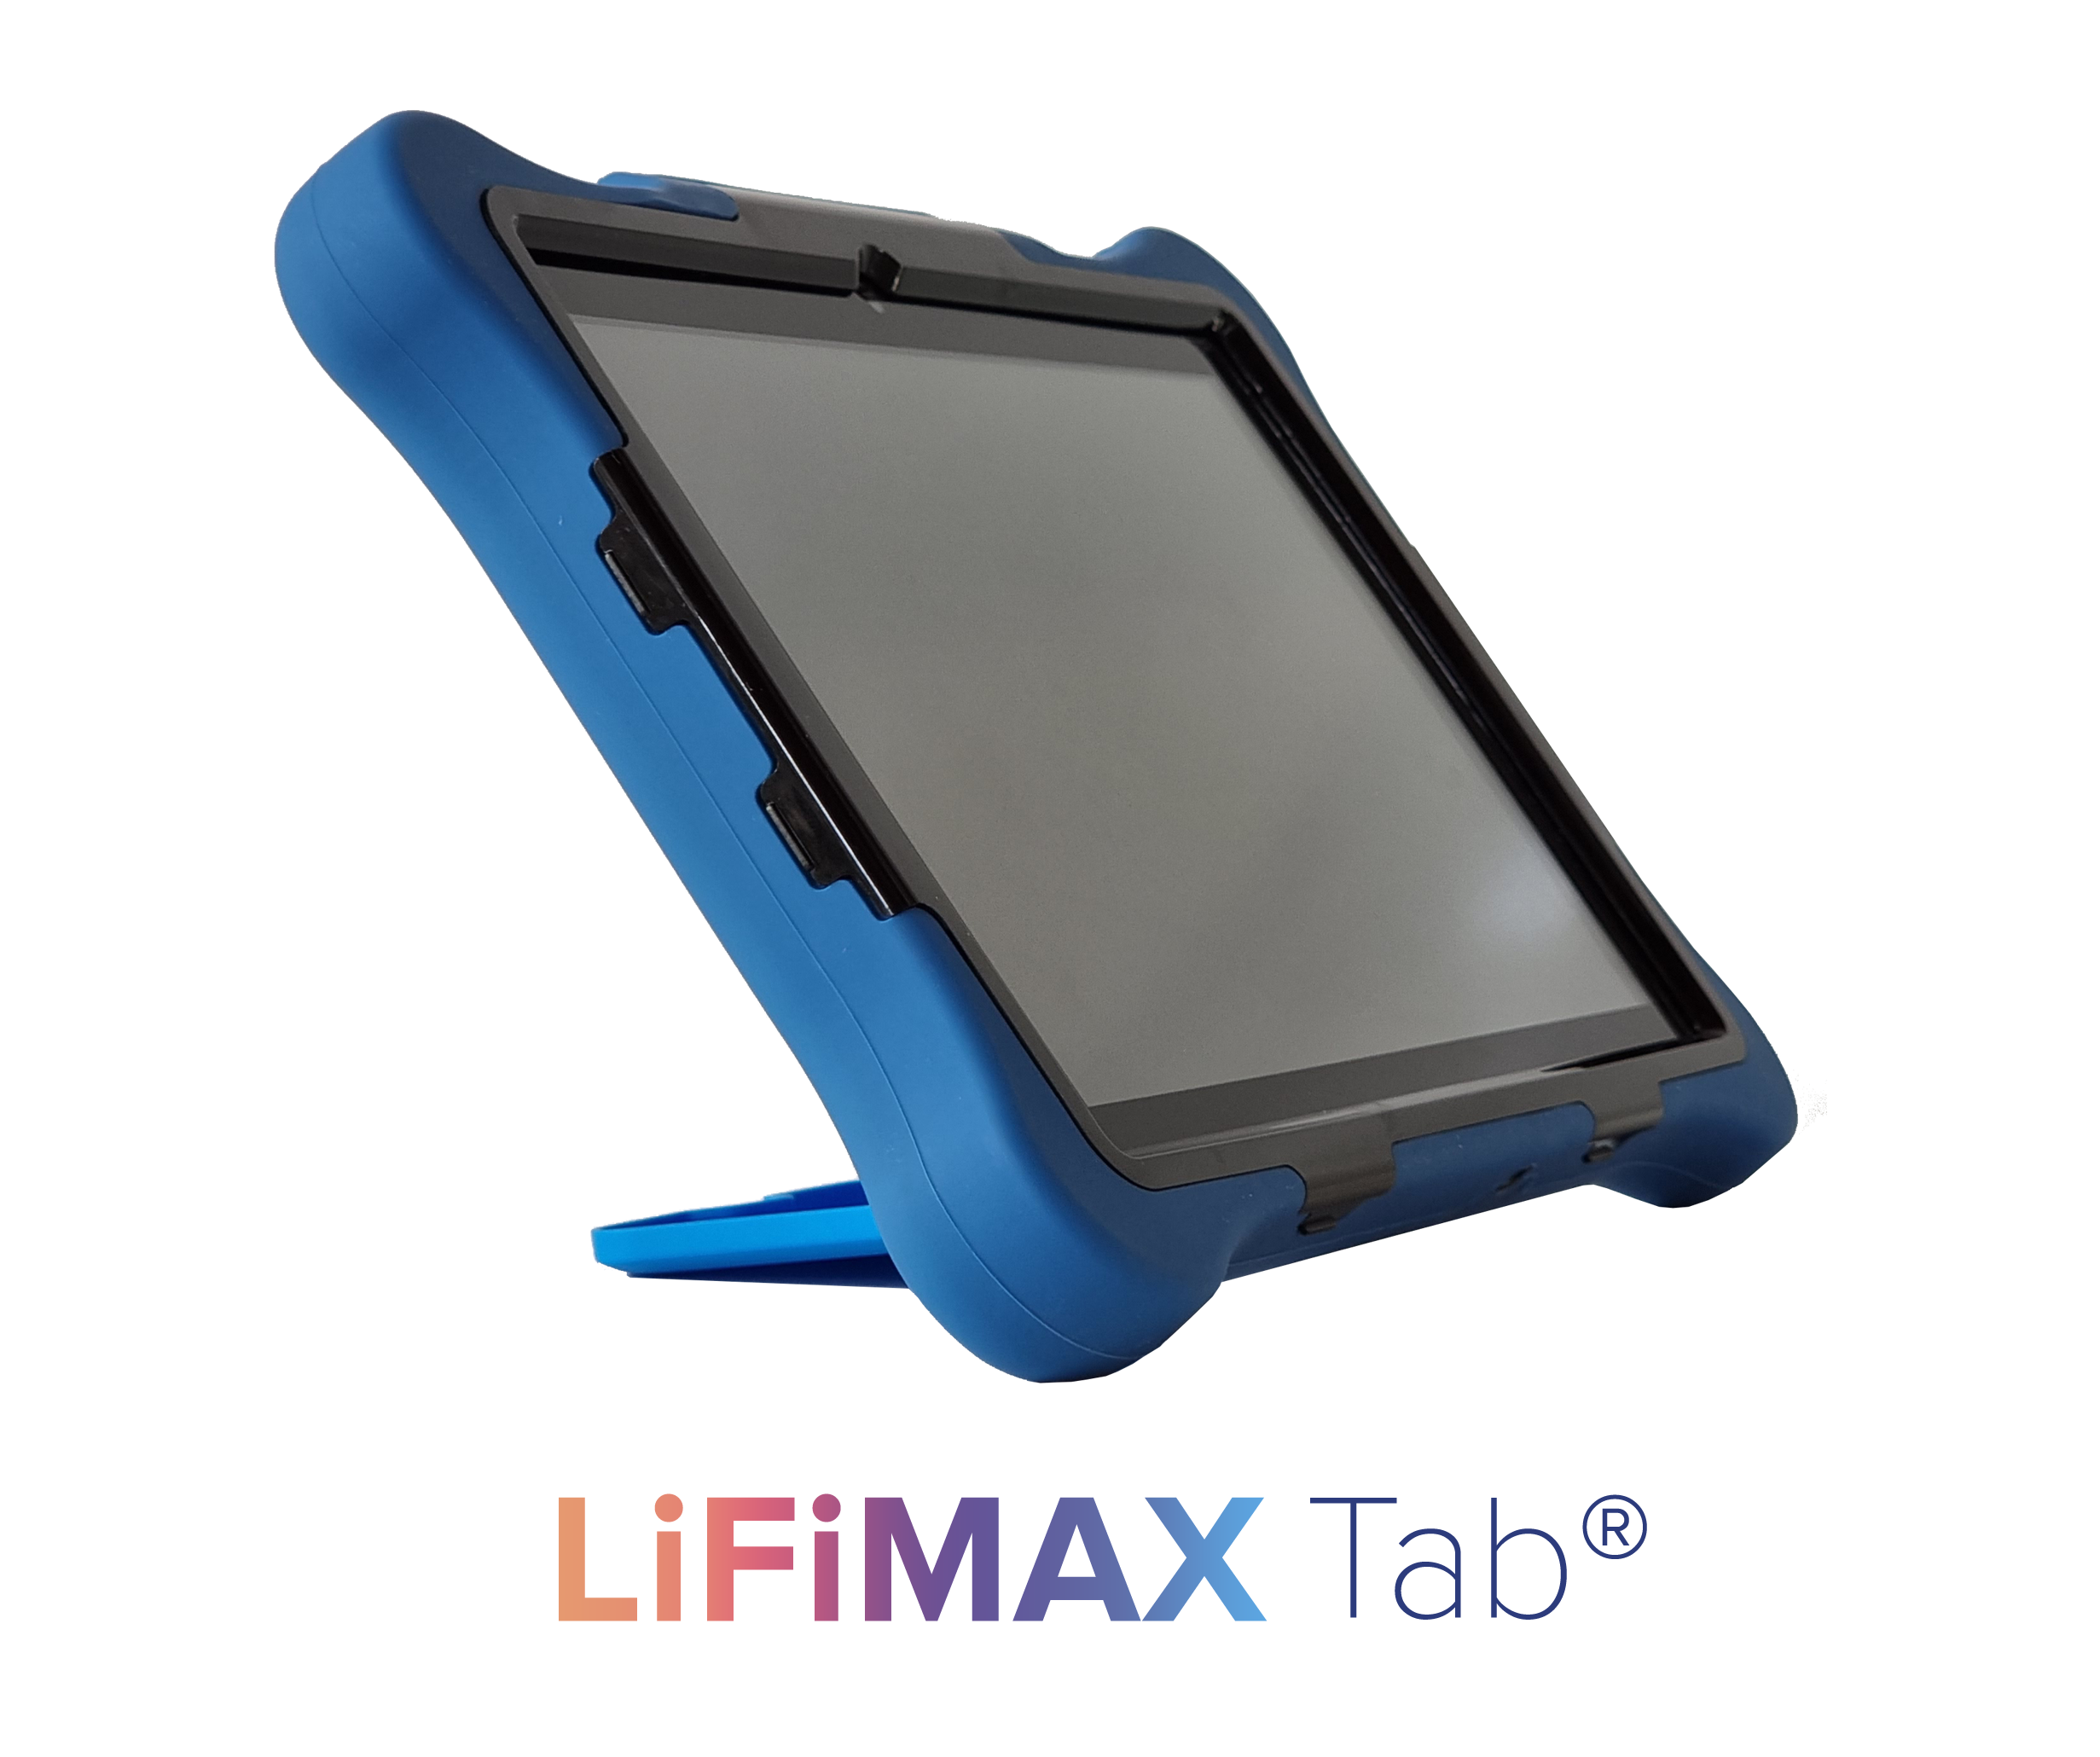 CES 2022: Oledcomm Launches LiFiMAXTab 1st Android Tablet With Integrated LiFi